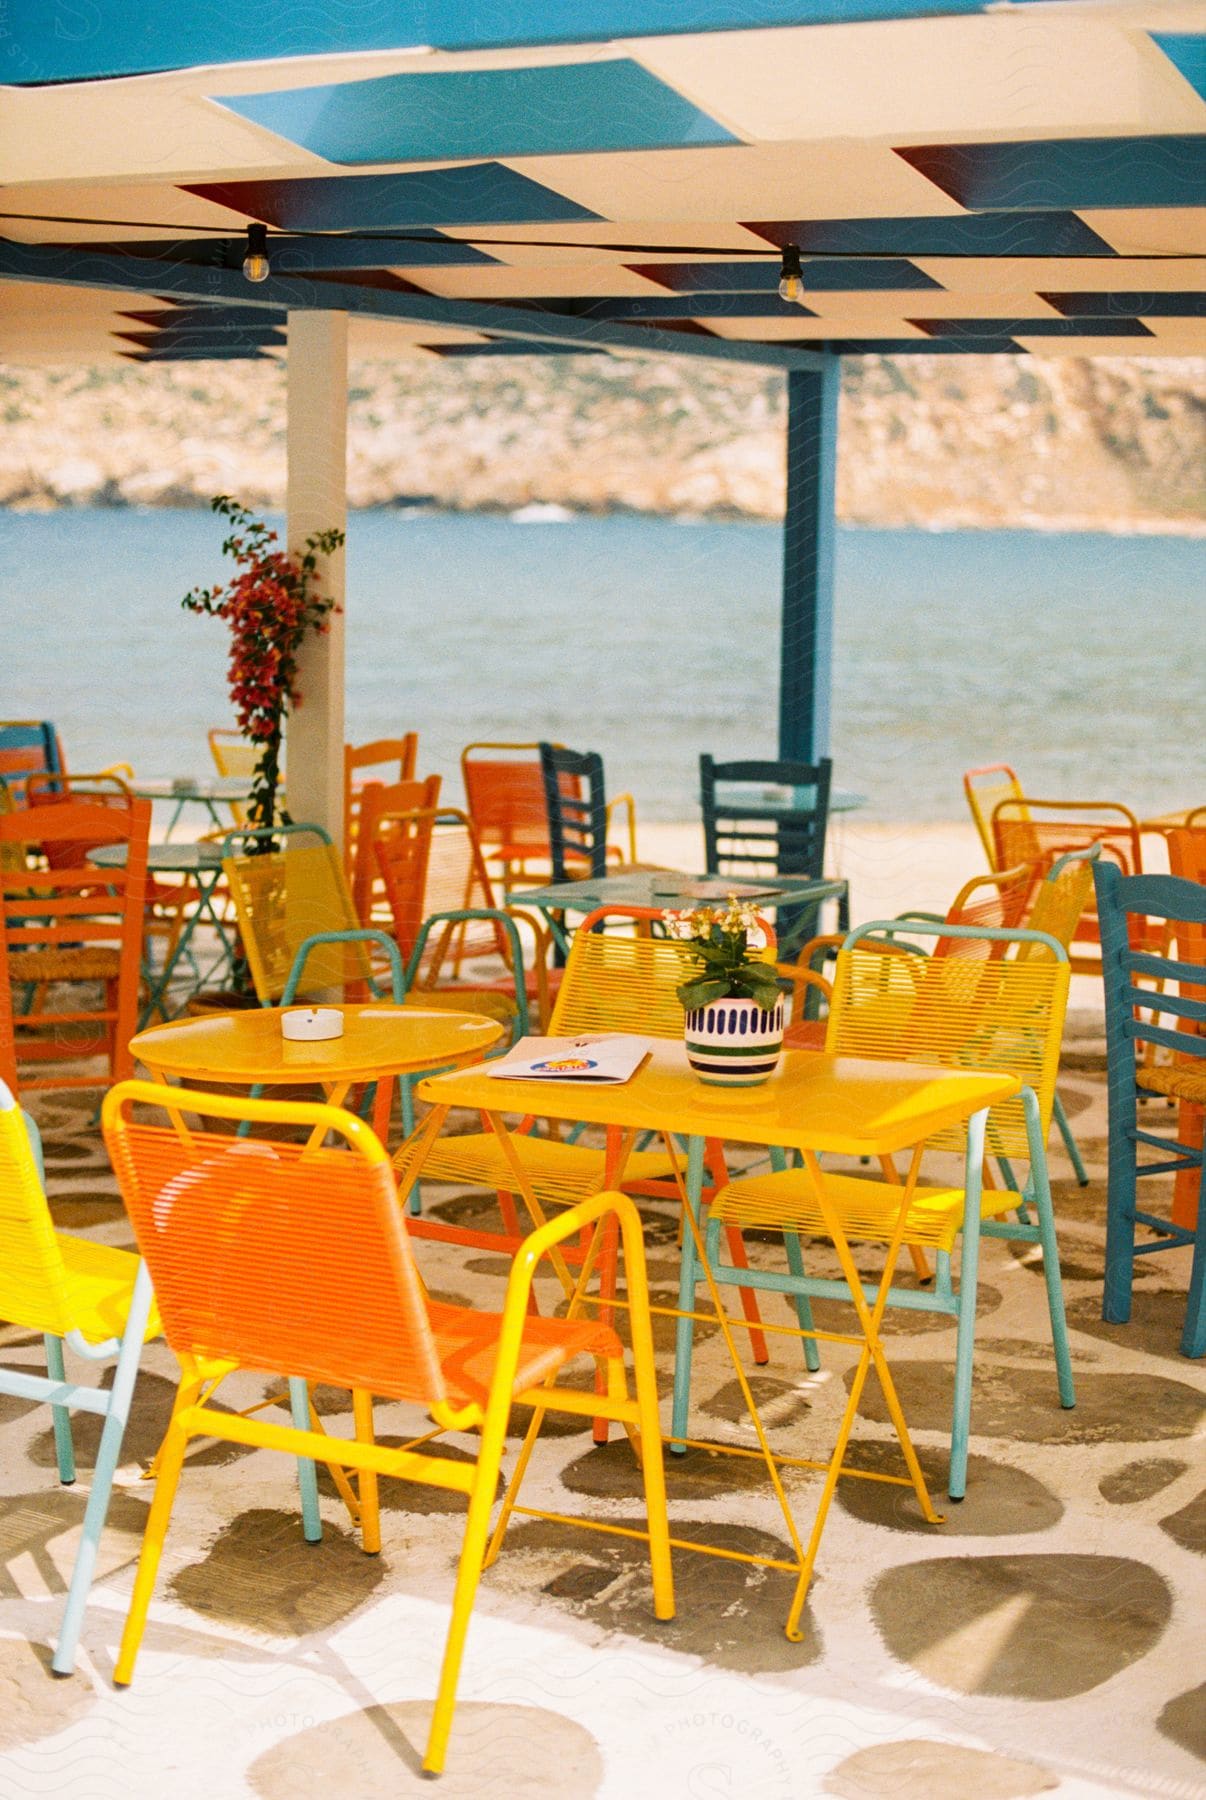 A yellow table and chairs on a restaurant patio on the shore.